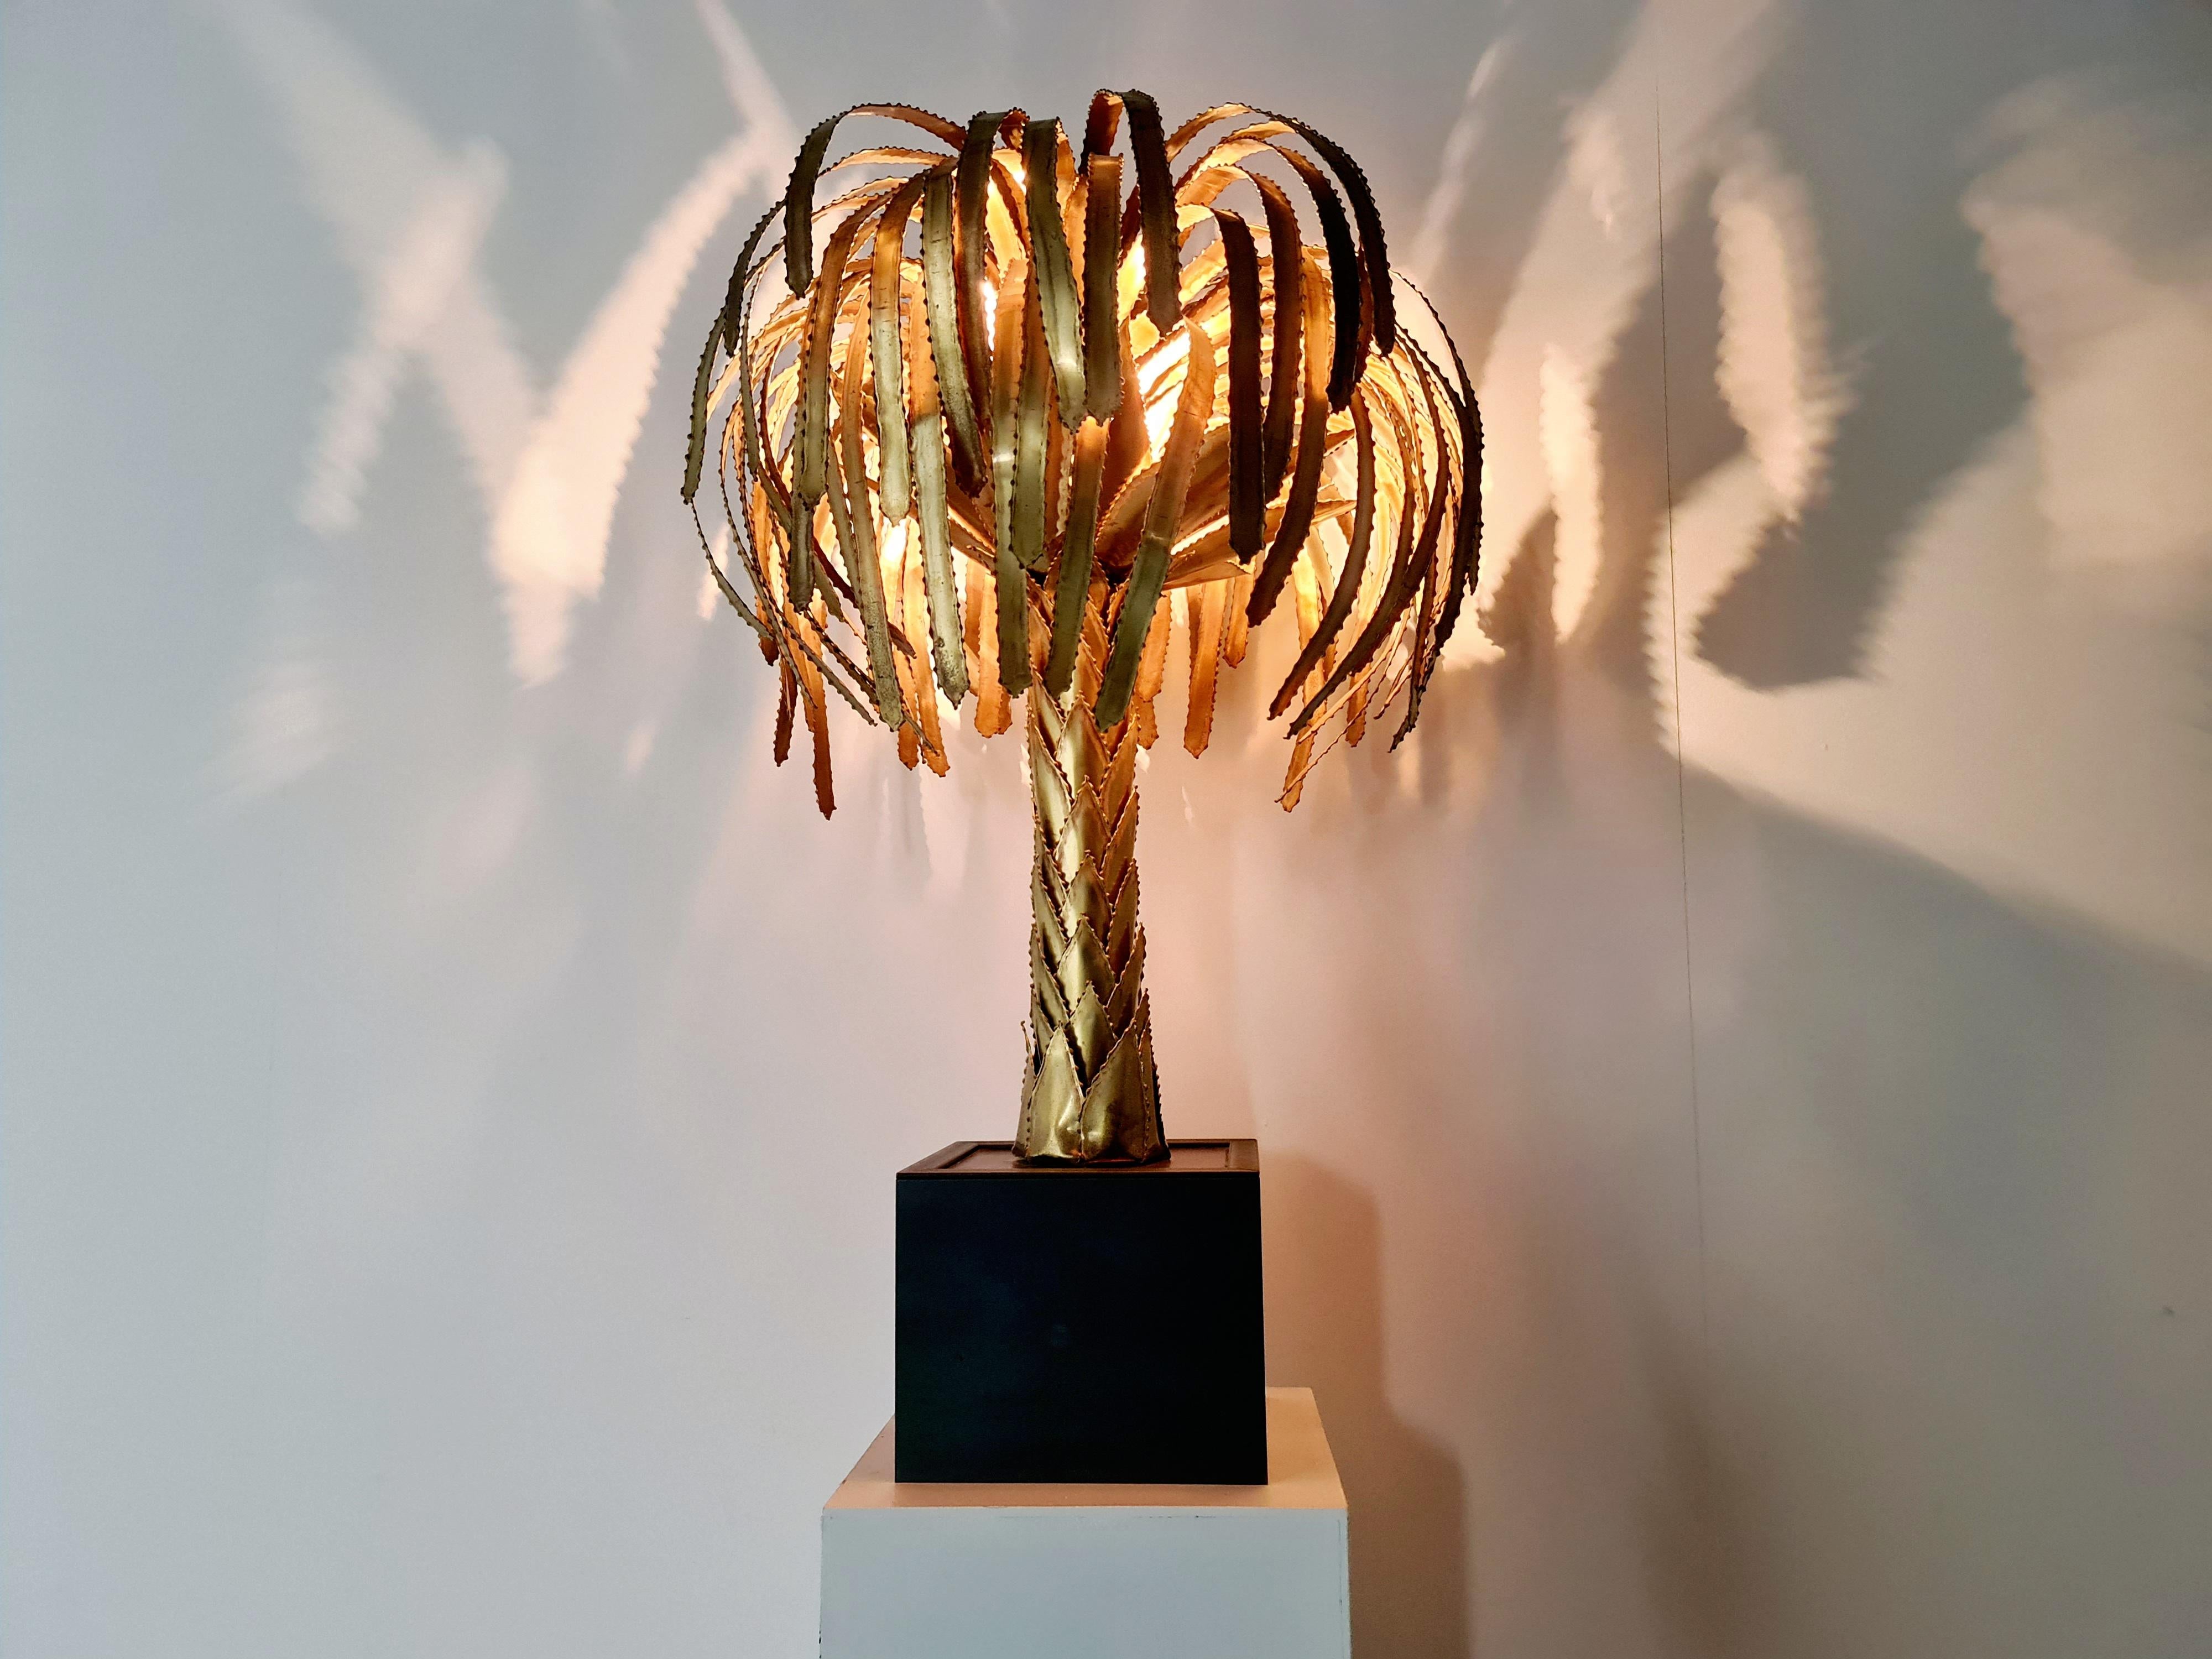 Highly decorative Maison Jansen palm tree lamp, France, 1960s. Torch cut patinated brass trunk and leafs coming out of a square black laminated heavy base. Hidden in the treetop are three bulbholders, they provide a warm light reflecting on the